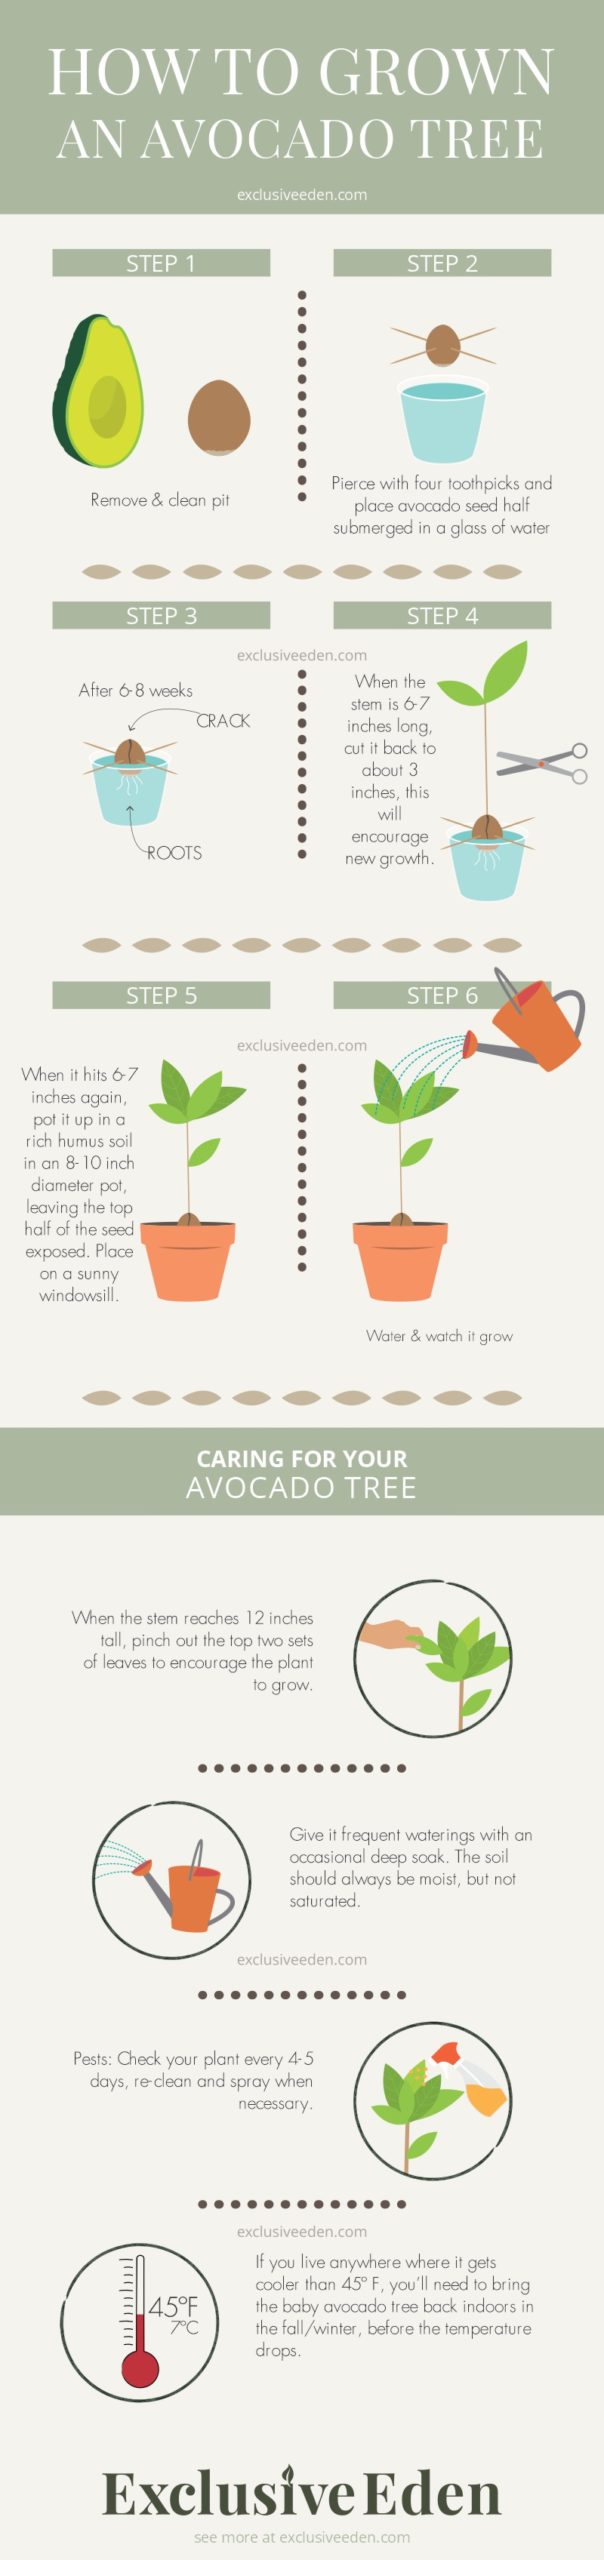 Popular guide on how to grow an avocado tree from seed. This has been beautifully illustrated.